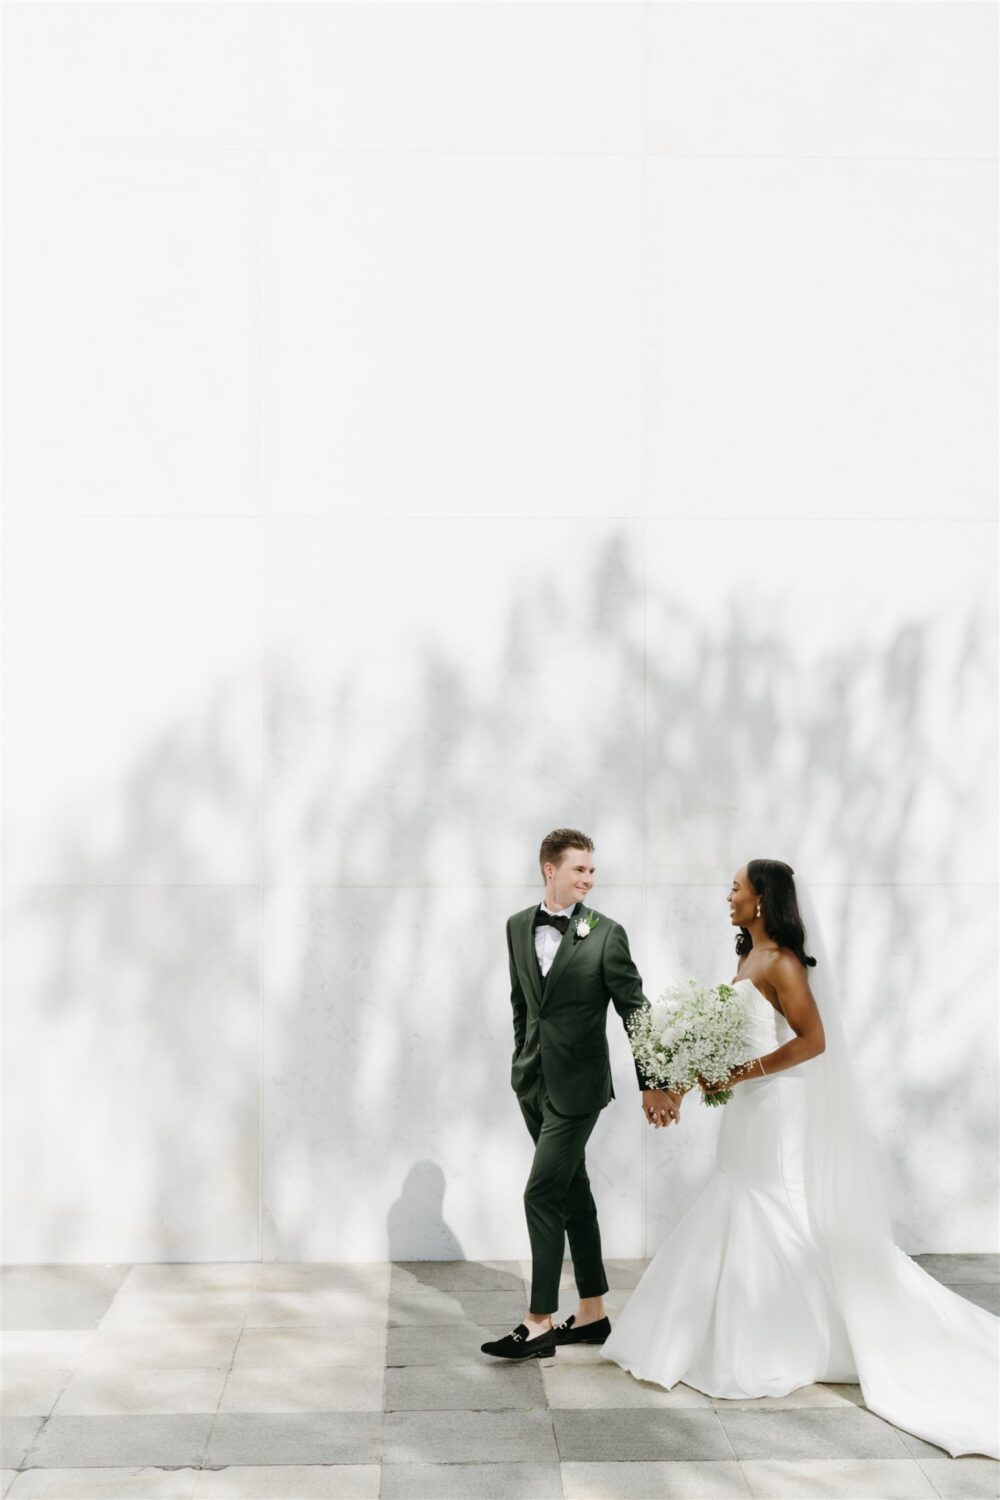 kennedy center reach bride and groom walking holding hands shadows on wall